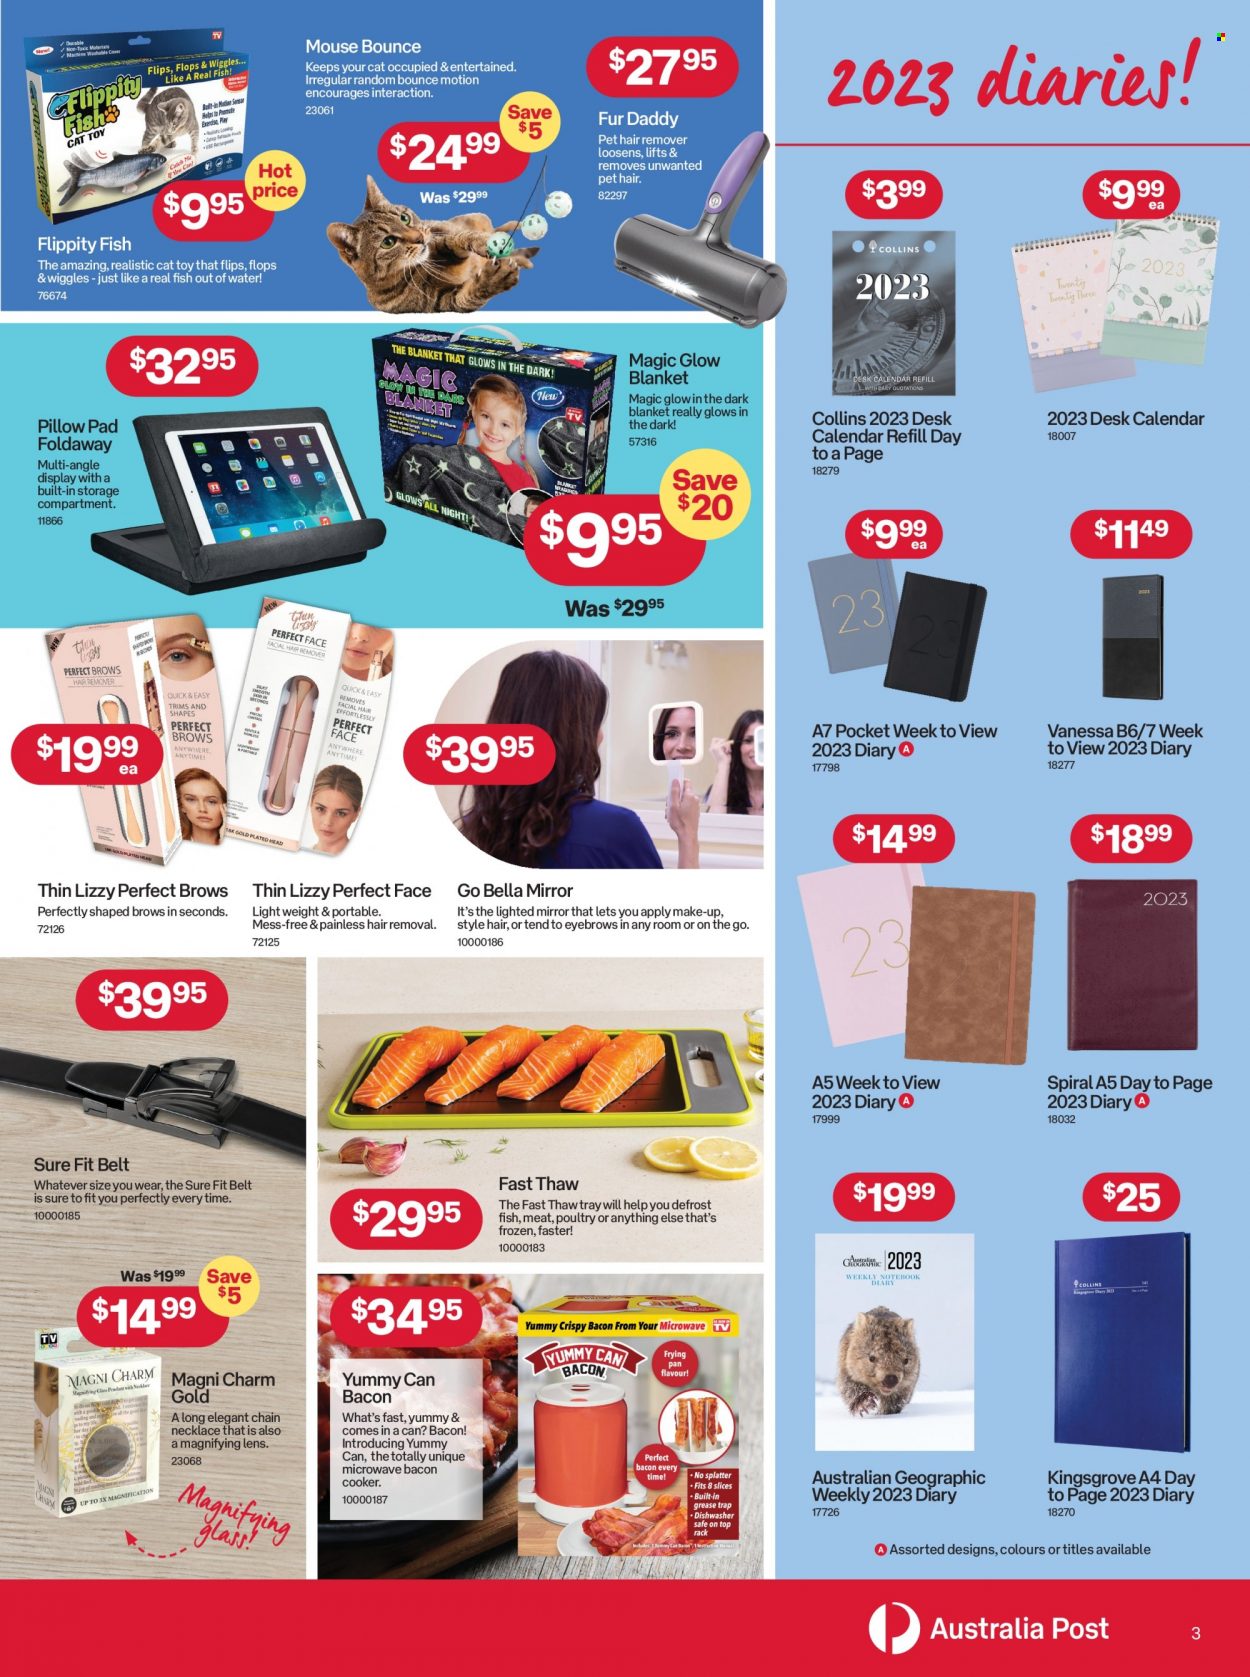 thumbnail - Australia Post Catalogue - 5 Dec 2022 - 24 Dec 2022 - Sales products - Bella, hair removal, tray, calendar, diary, blanket, pillow, mouse, lens, microwave, toys. Page 3.